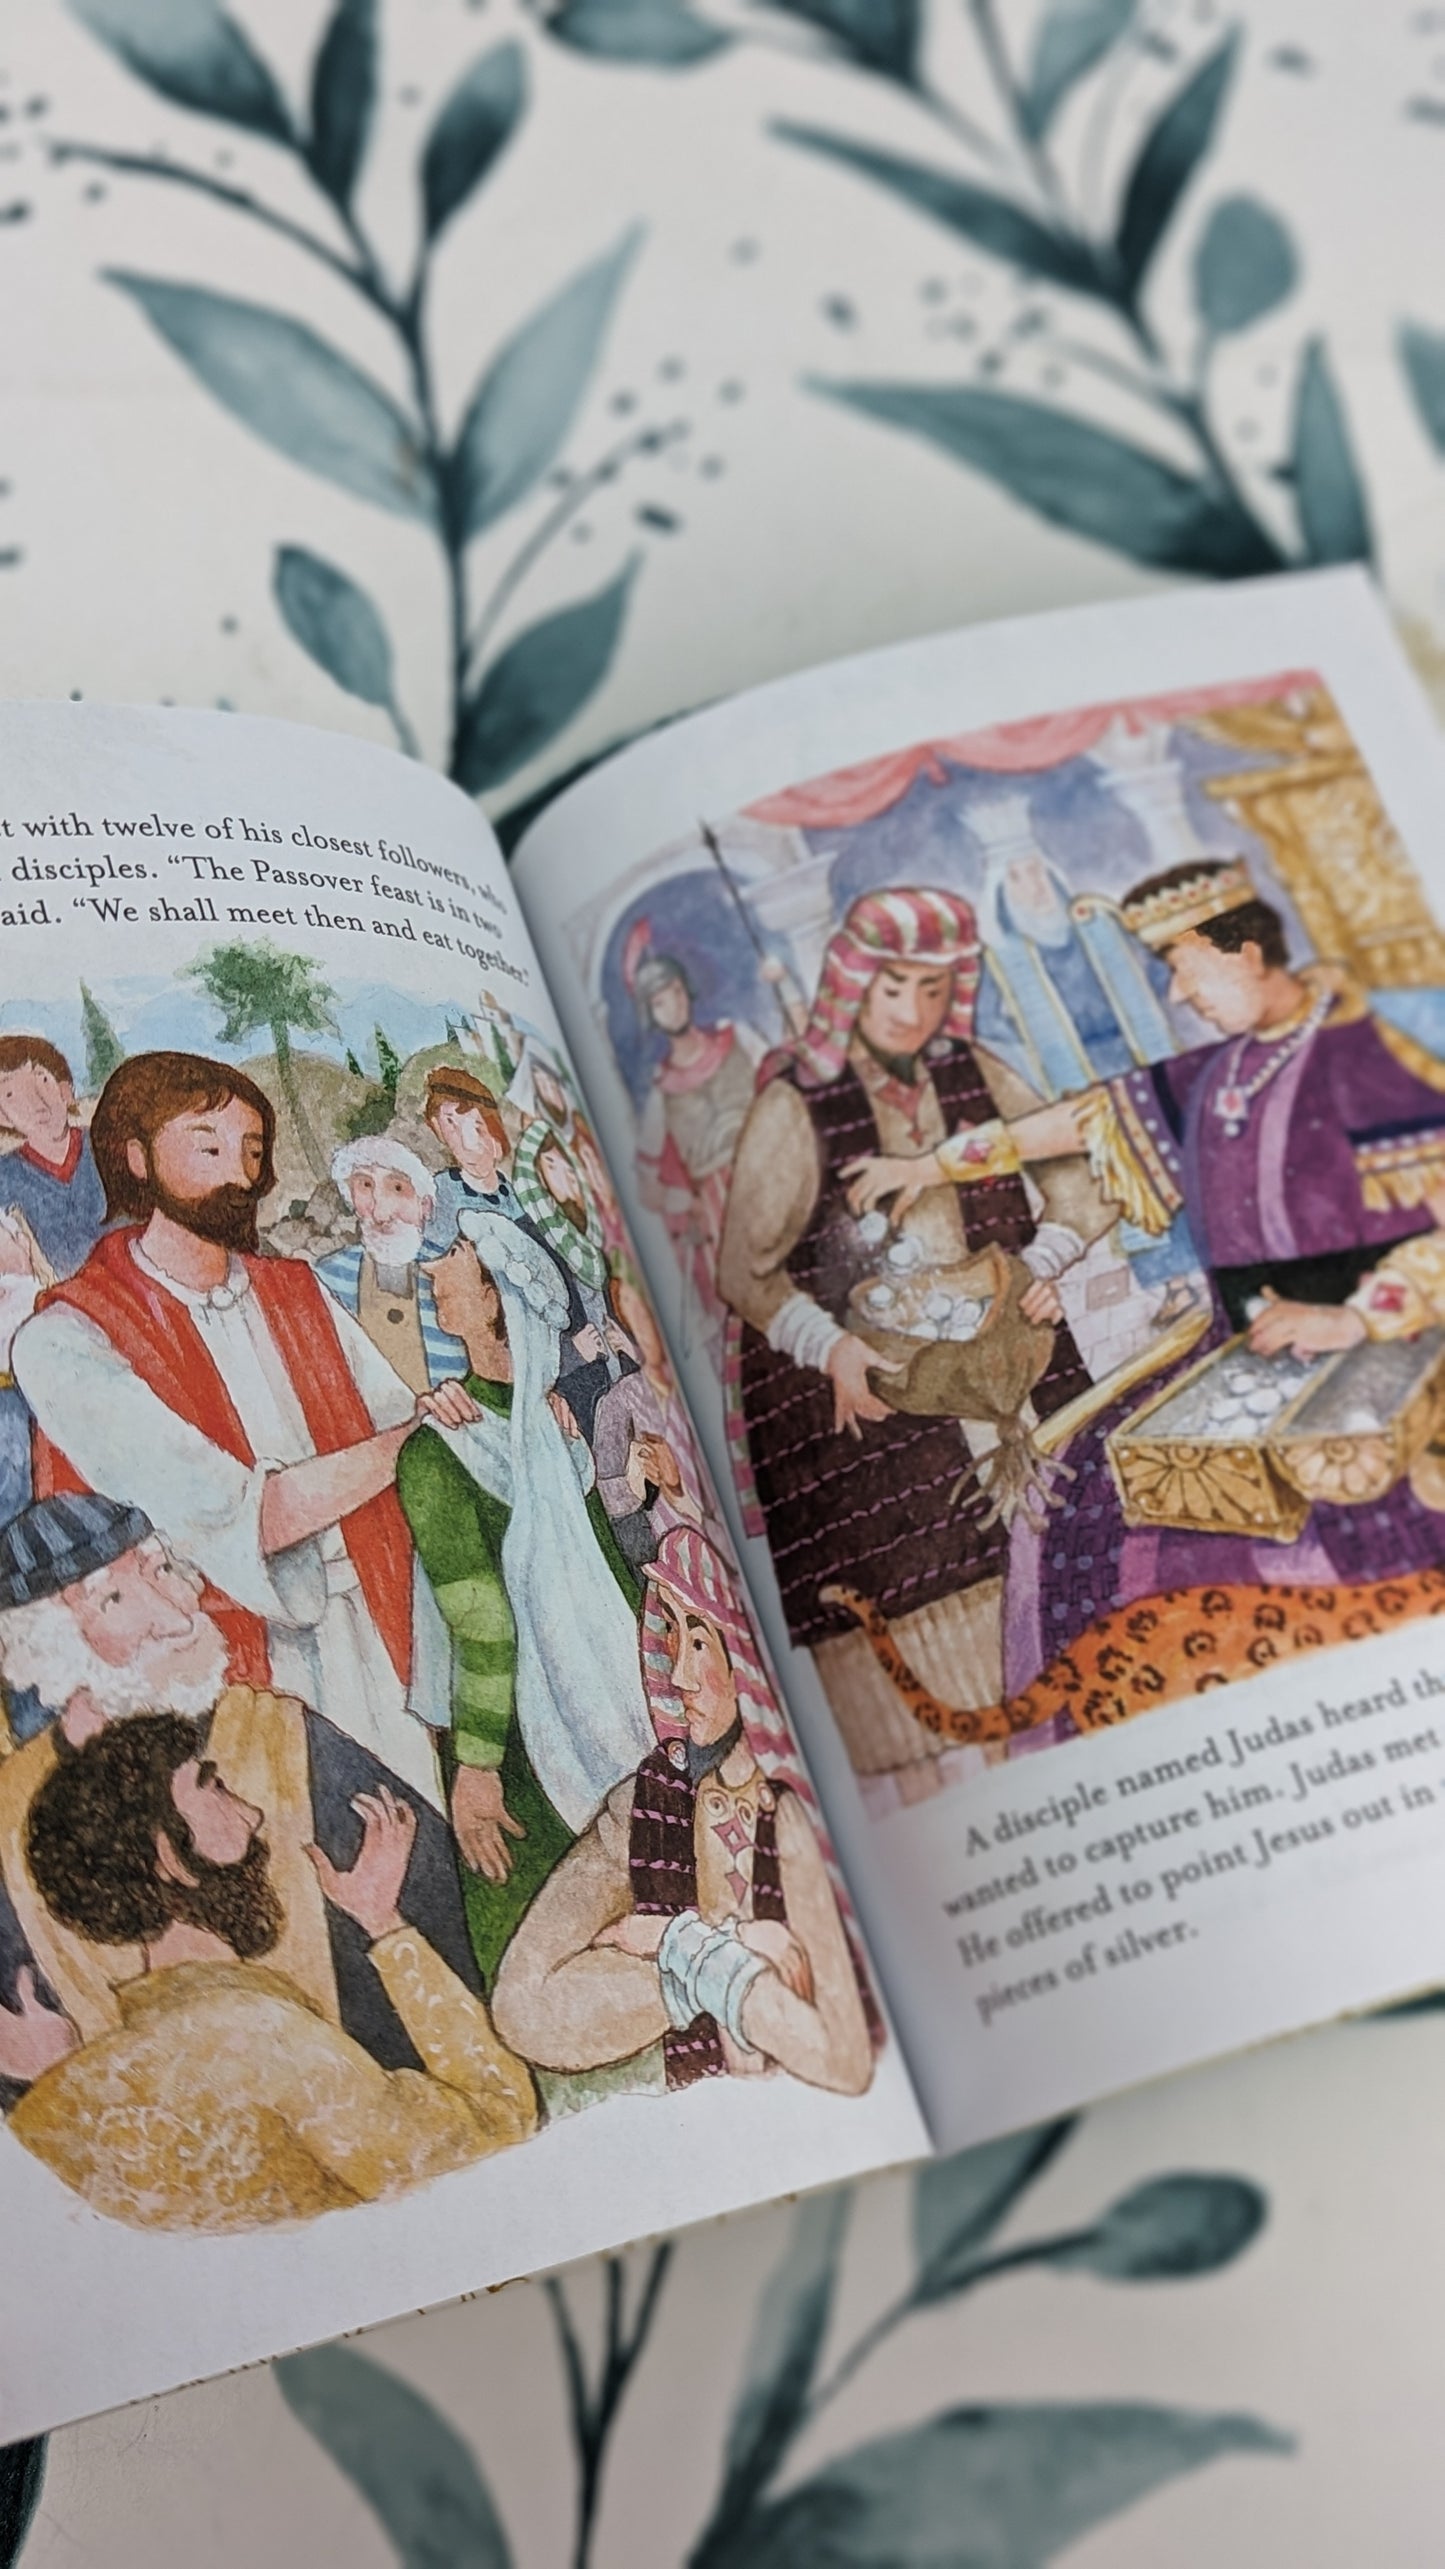 Little Golden Book: The Story of Easter